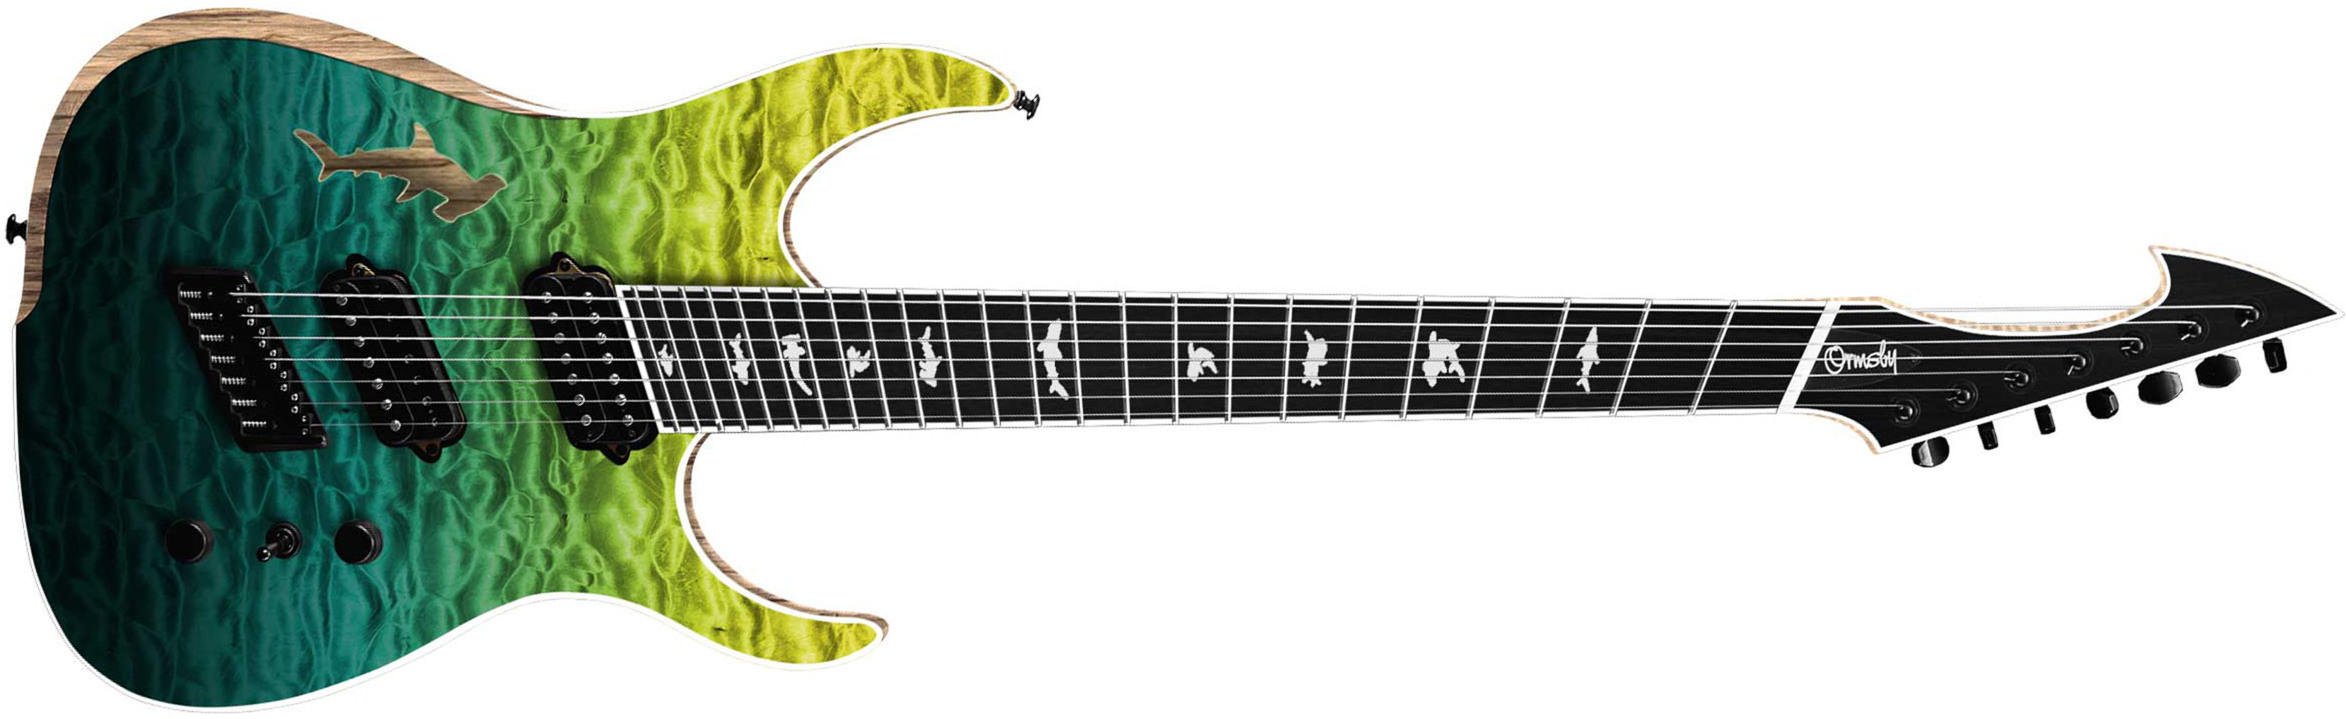 Ormsby Hype Gtr Shark 7c Multiscale 2h Ht Eb - Carribean Blue/green - Multi-Scale Guitar - Main picture